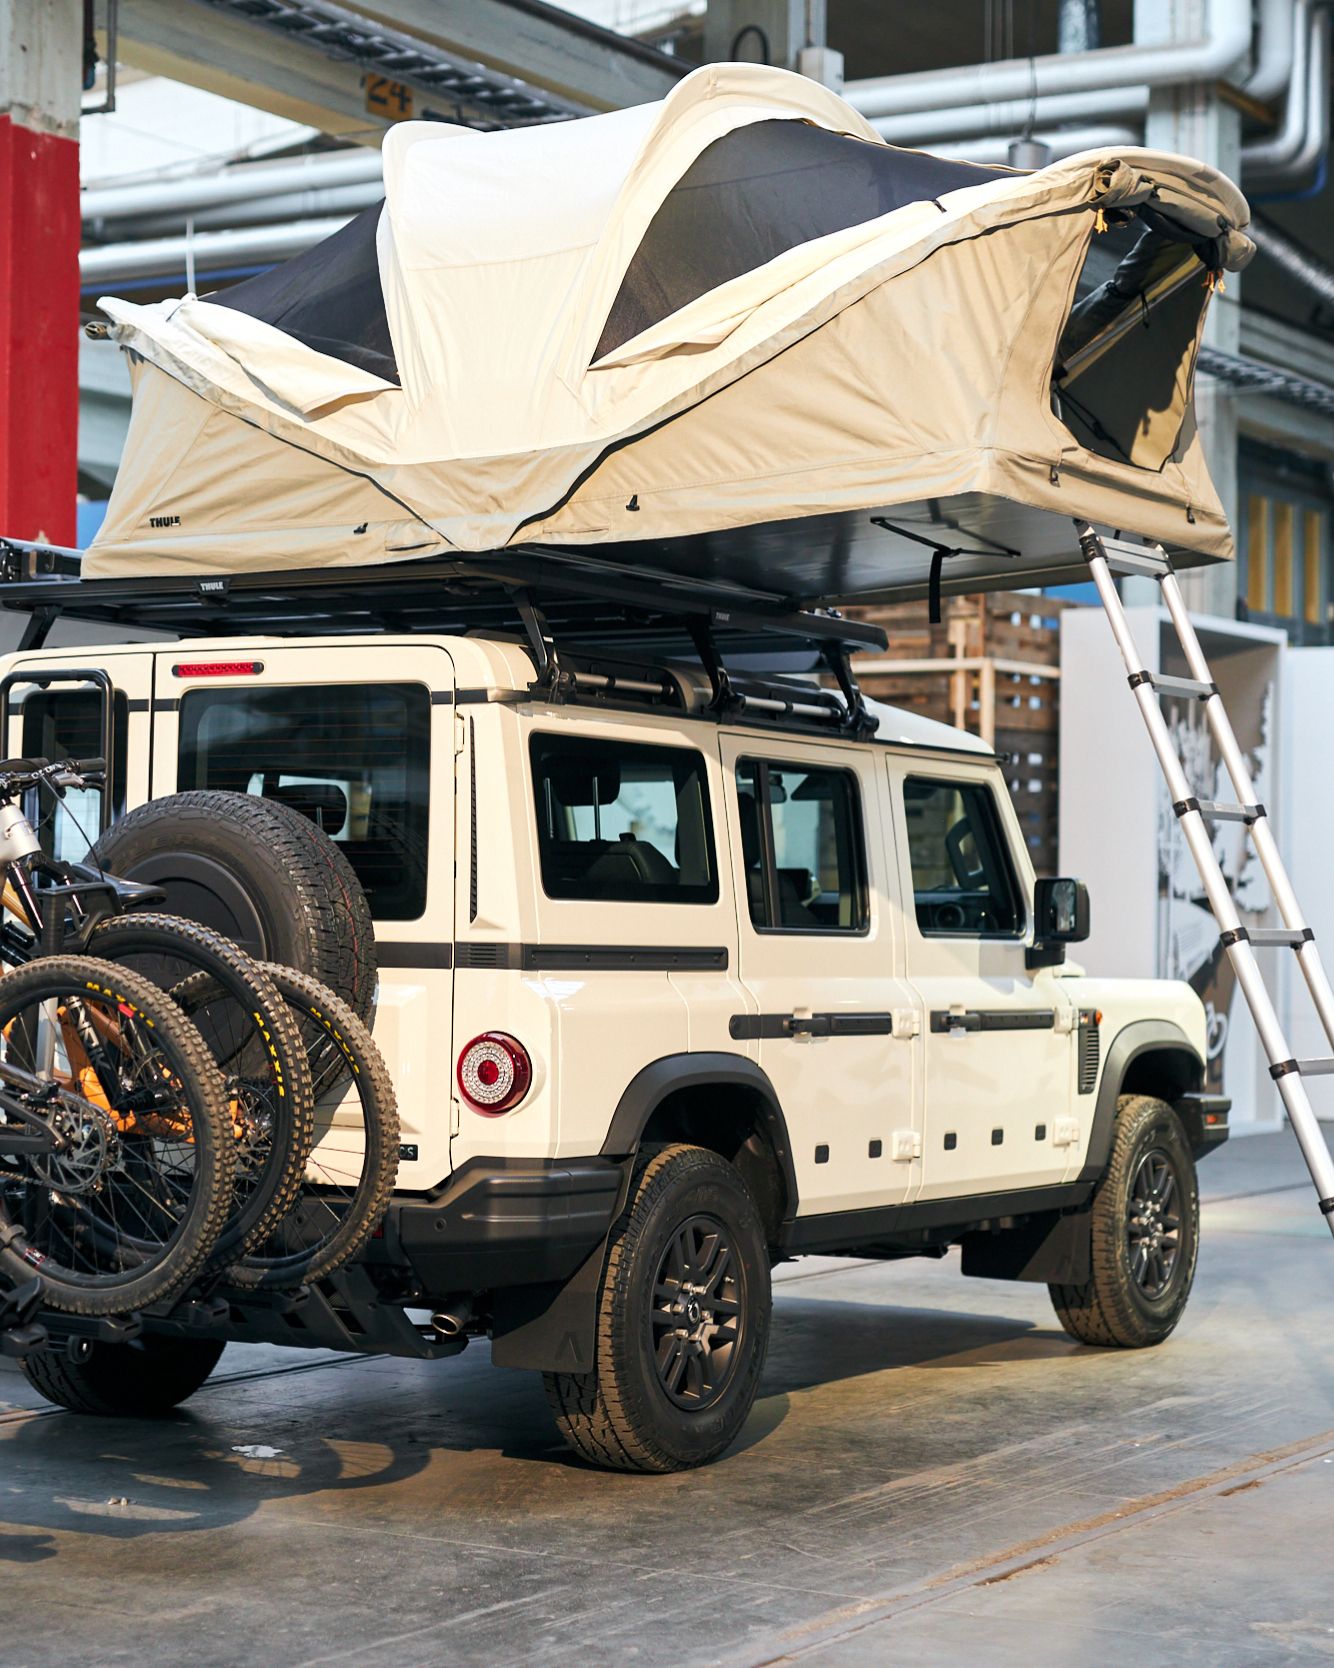 A white jeep parked in an exhibition hall with a an unfolded Thule Approach rooftop tent and three bicycles on the back.